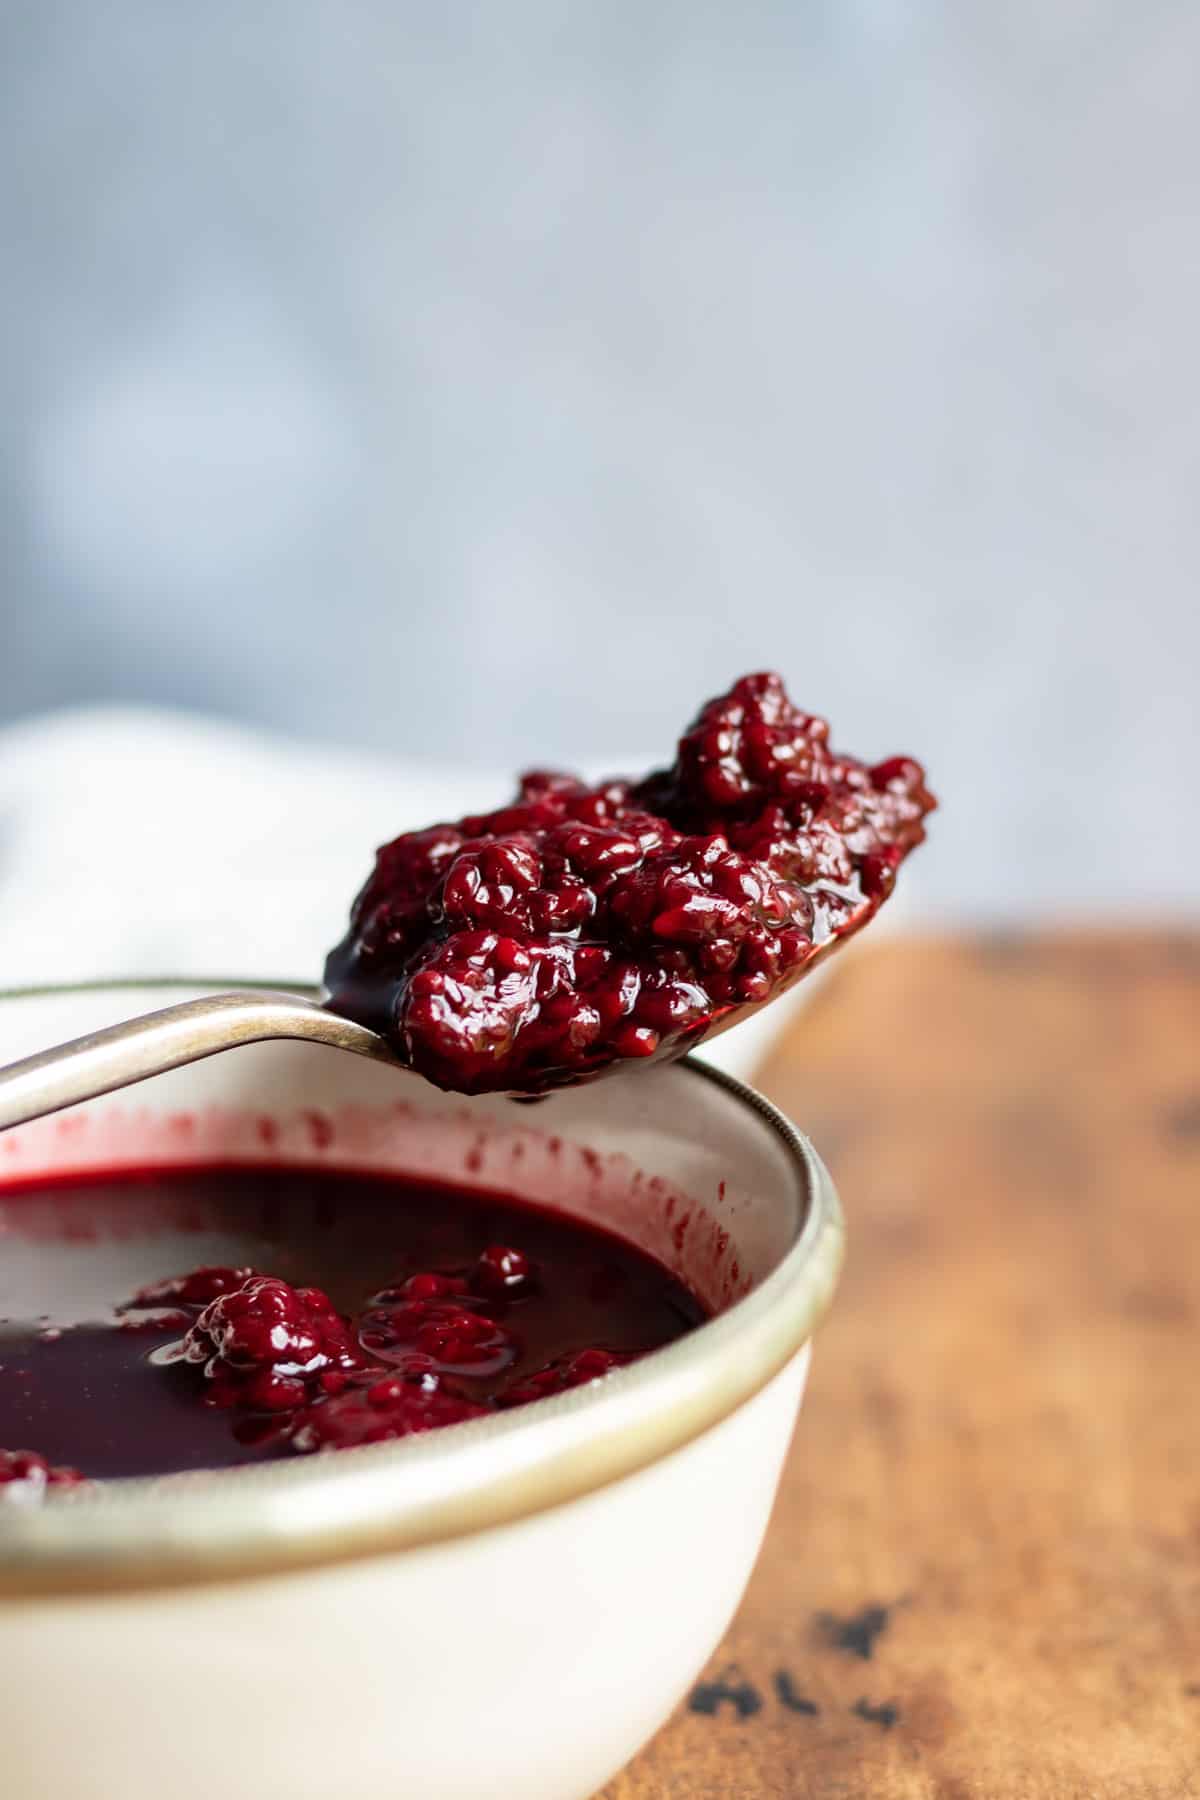 Spoonful of compote on a bowl of it.